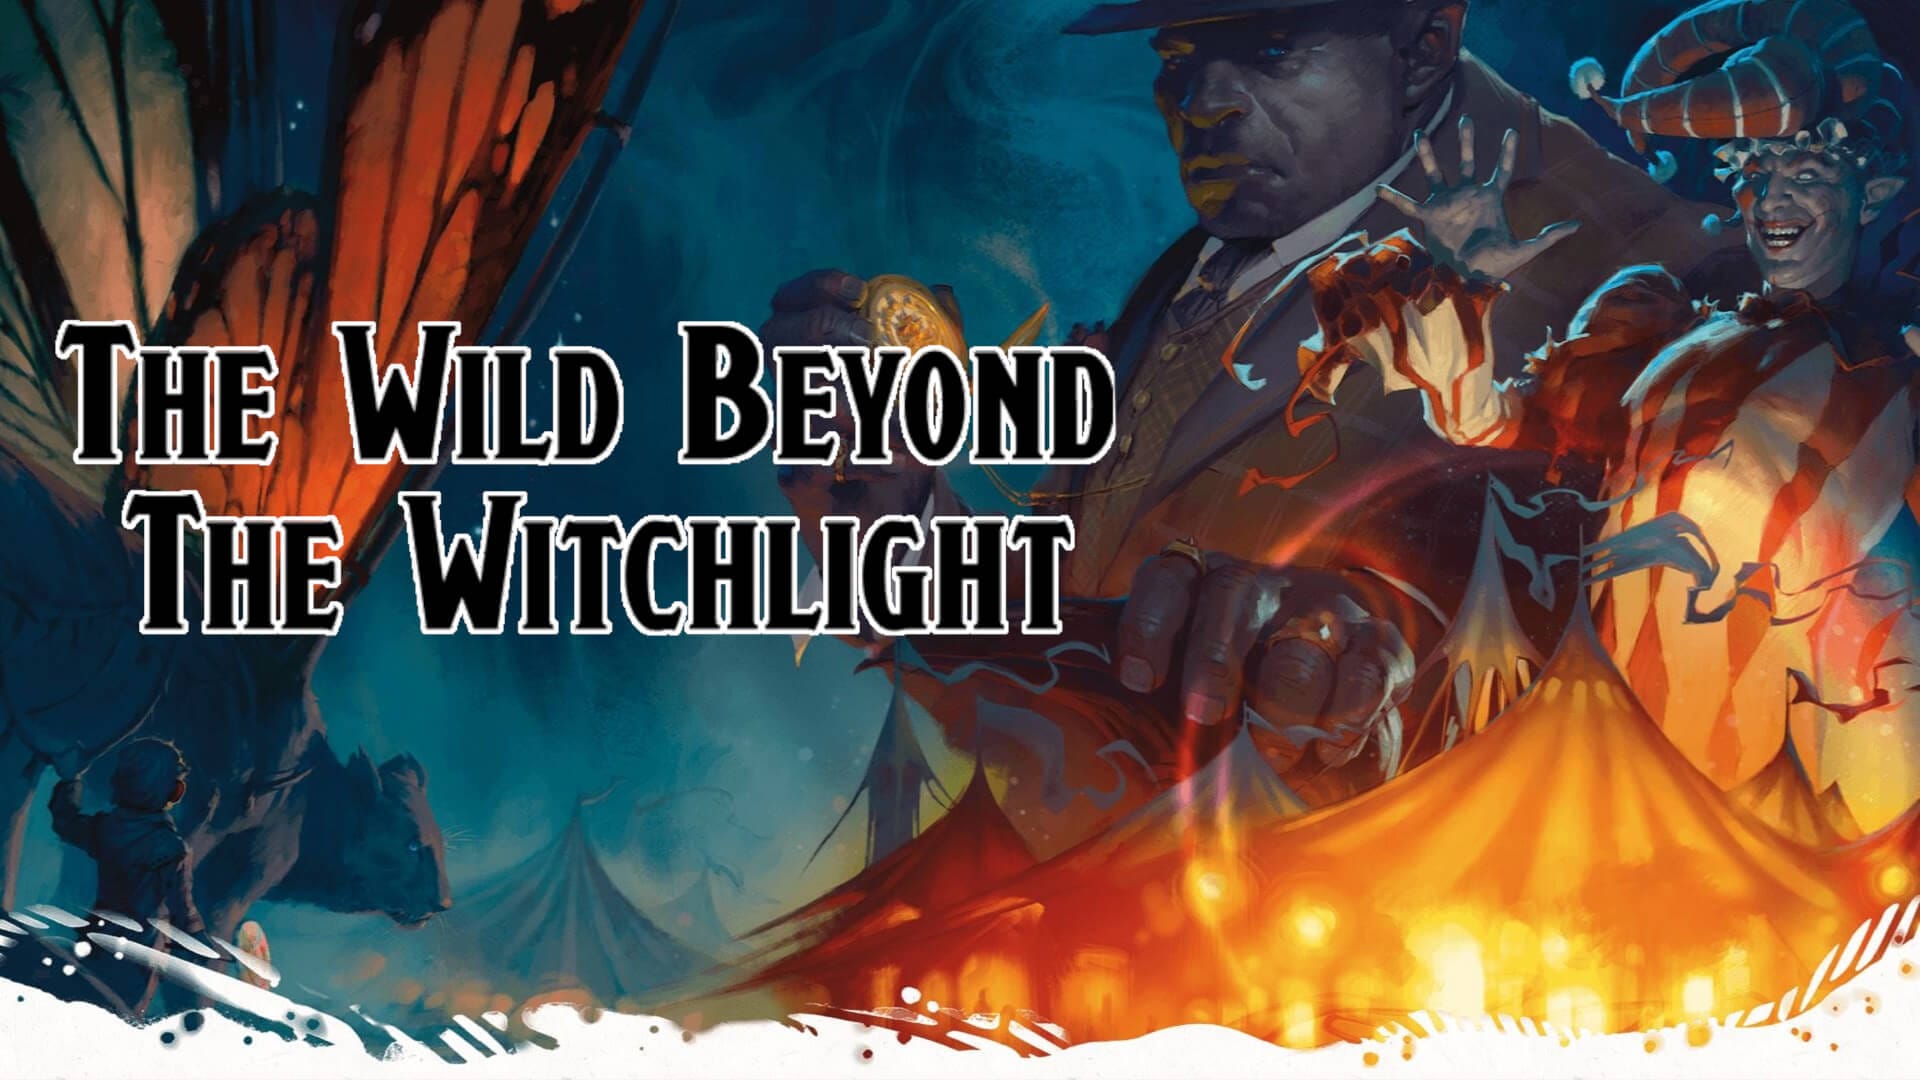 The Wild Beyond the Witchlight Preview Image